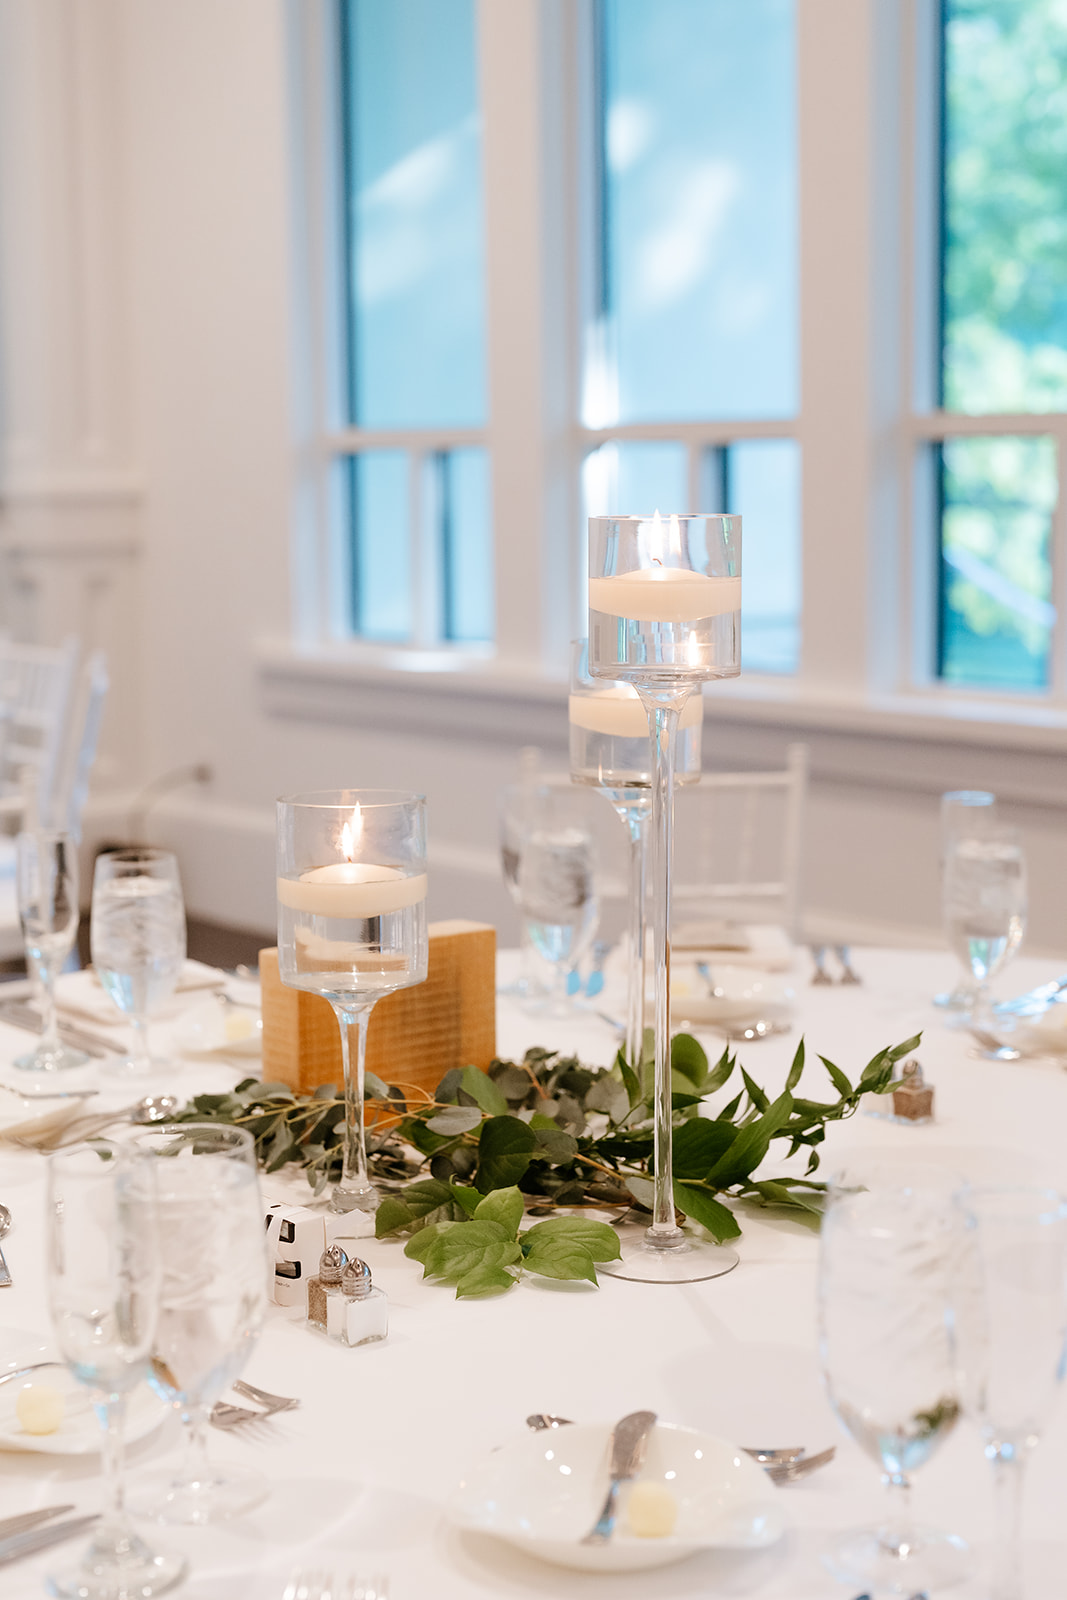 An elegantly set table featuring white linens, tall glass candle holders with lit candles, green foliage decorations, and place settings with silverware and glassware.